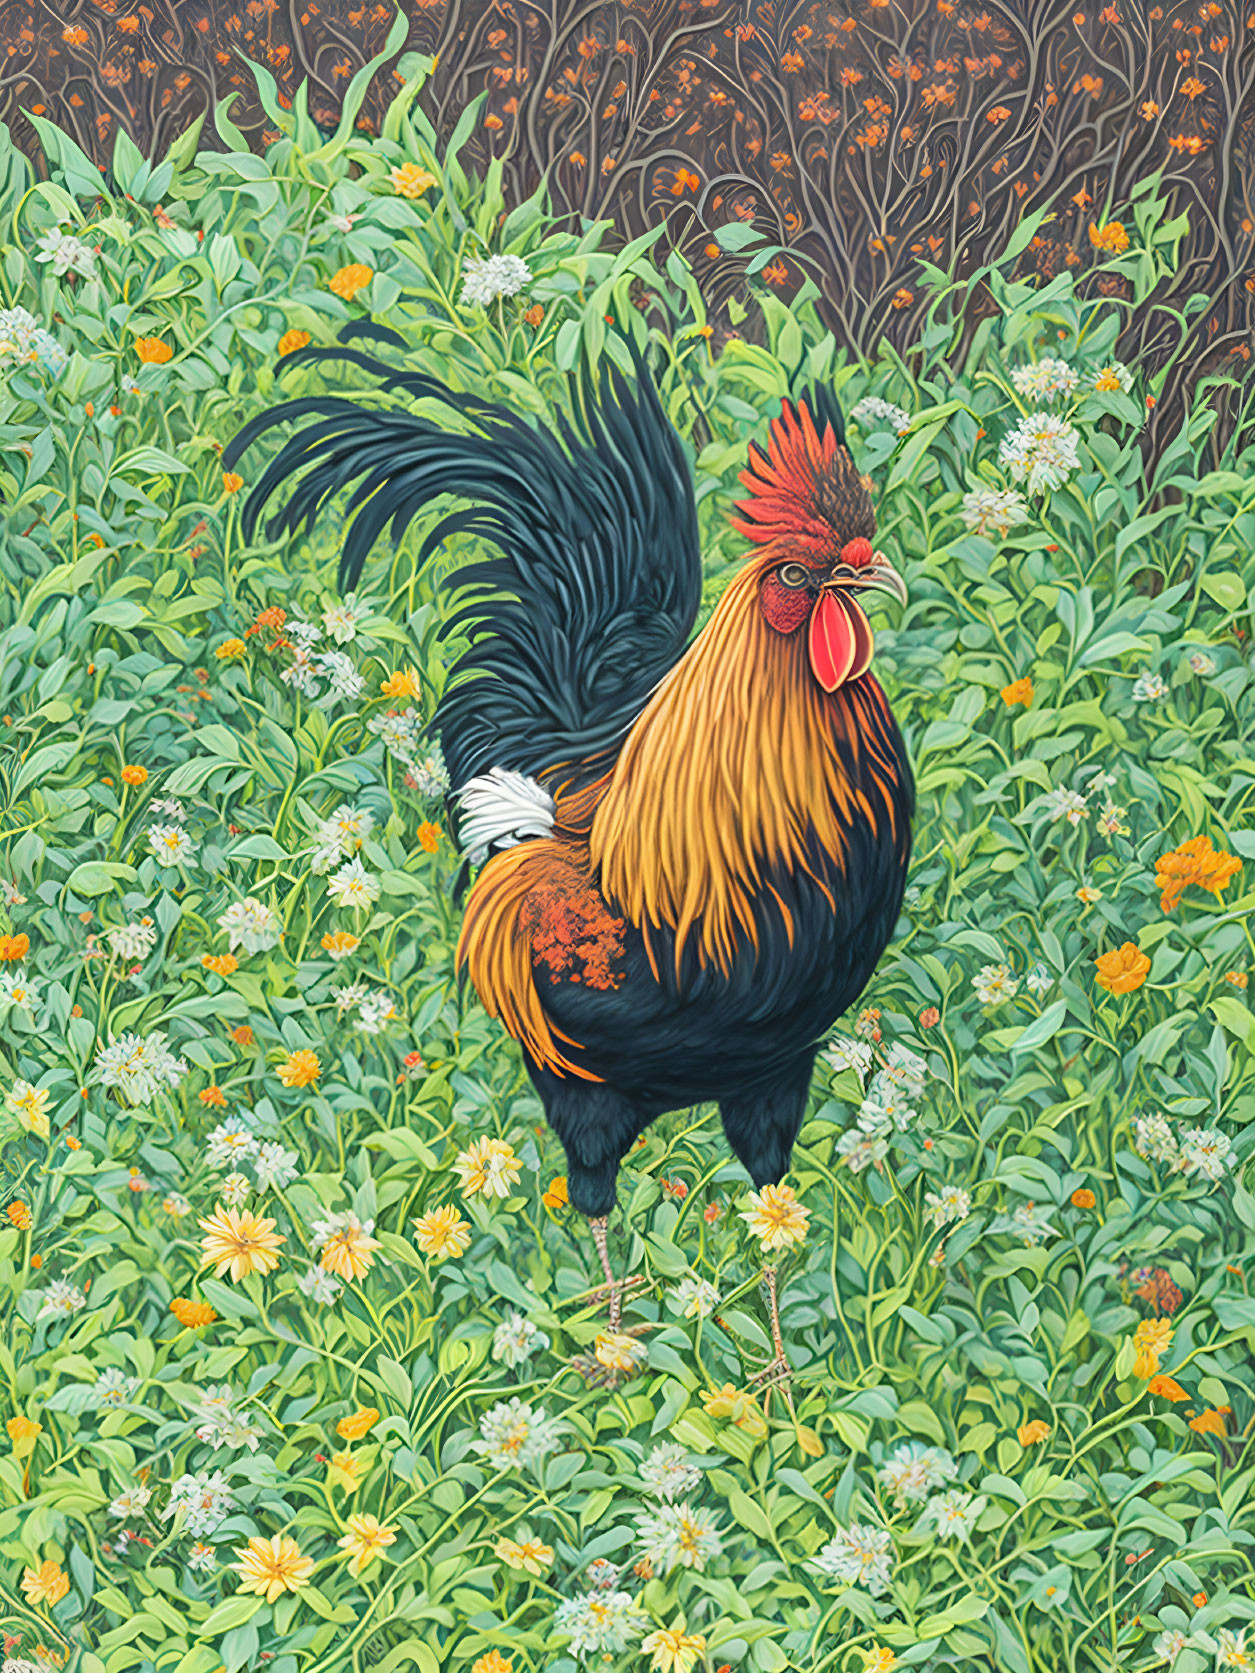 Colorful Rooster Surrounded by Greenery and Yellow Flowers